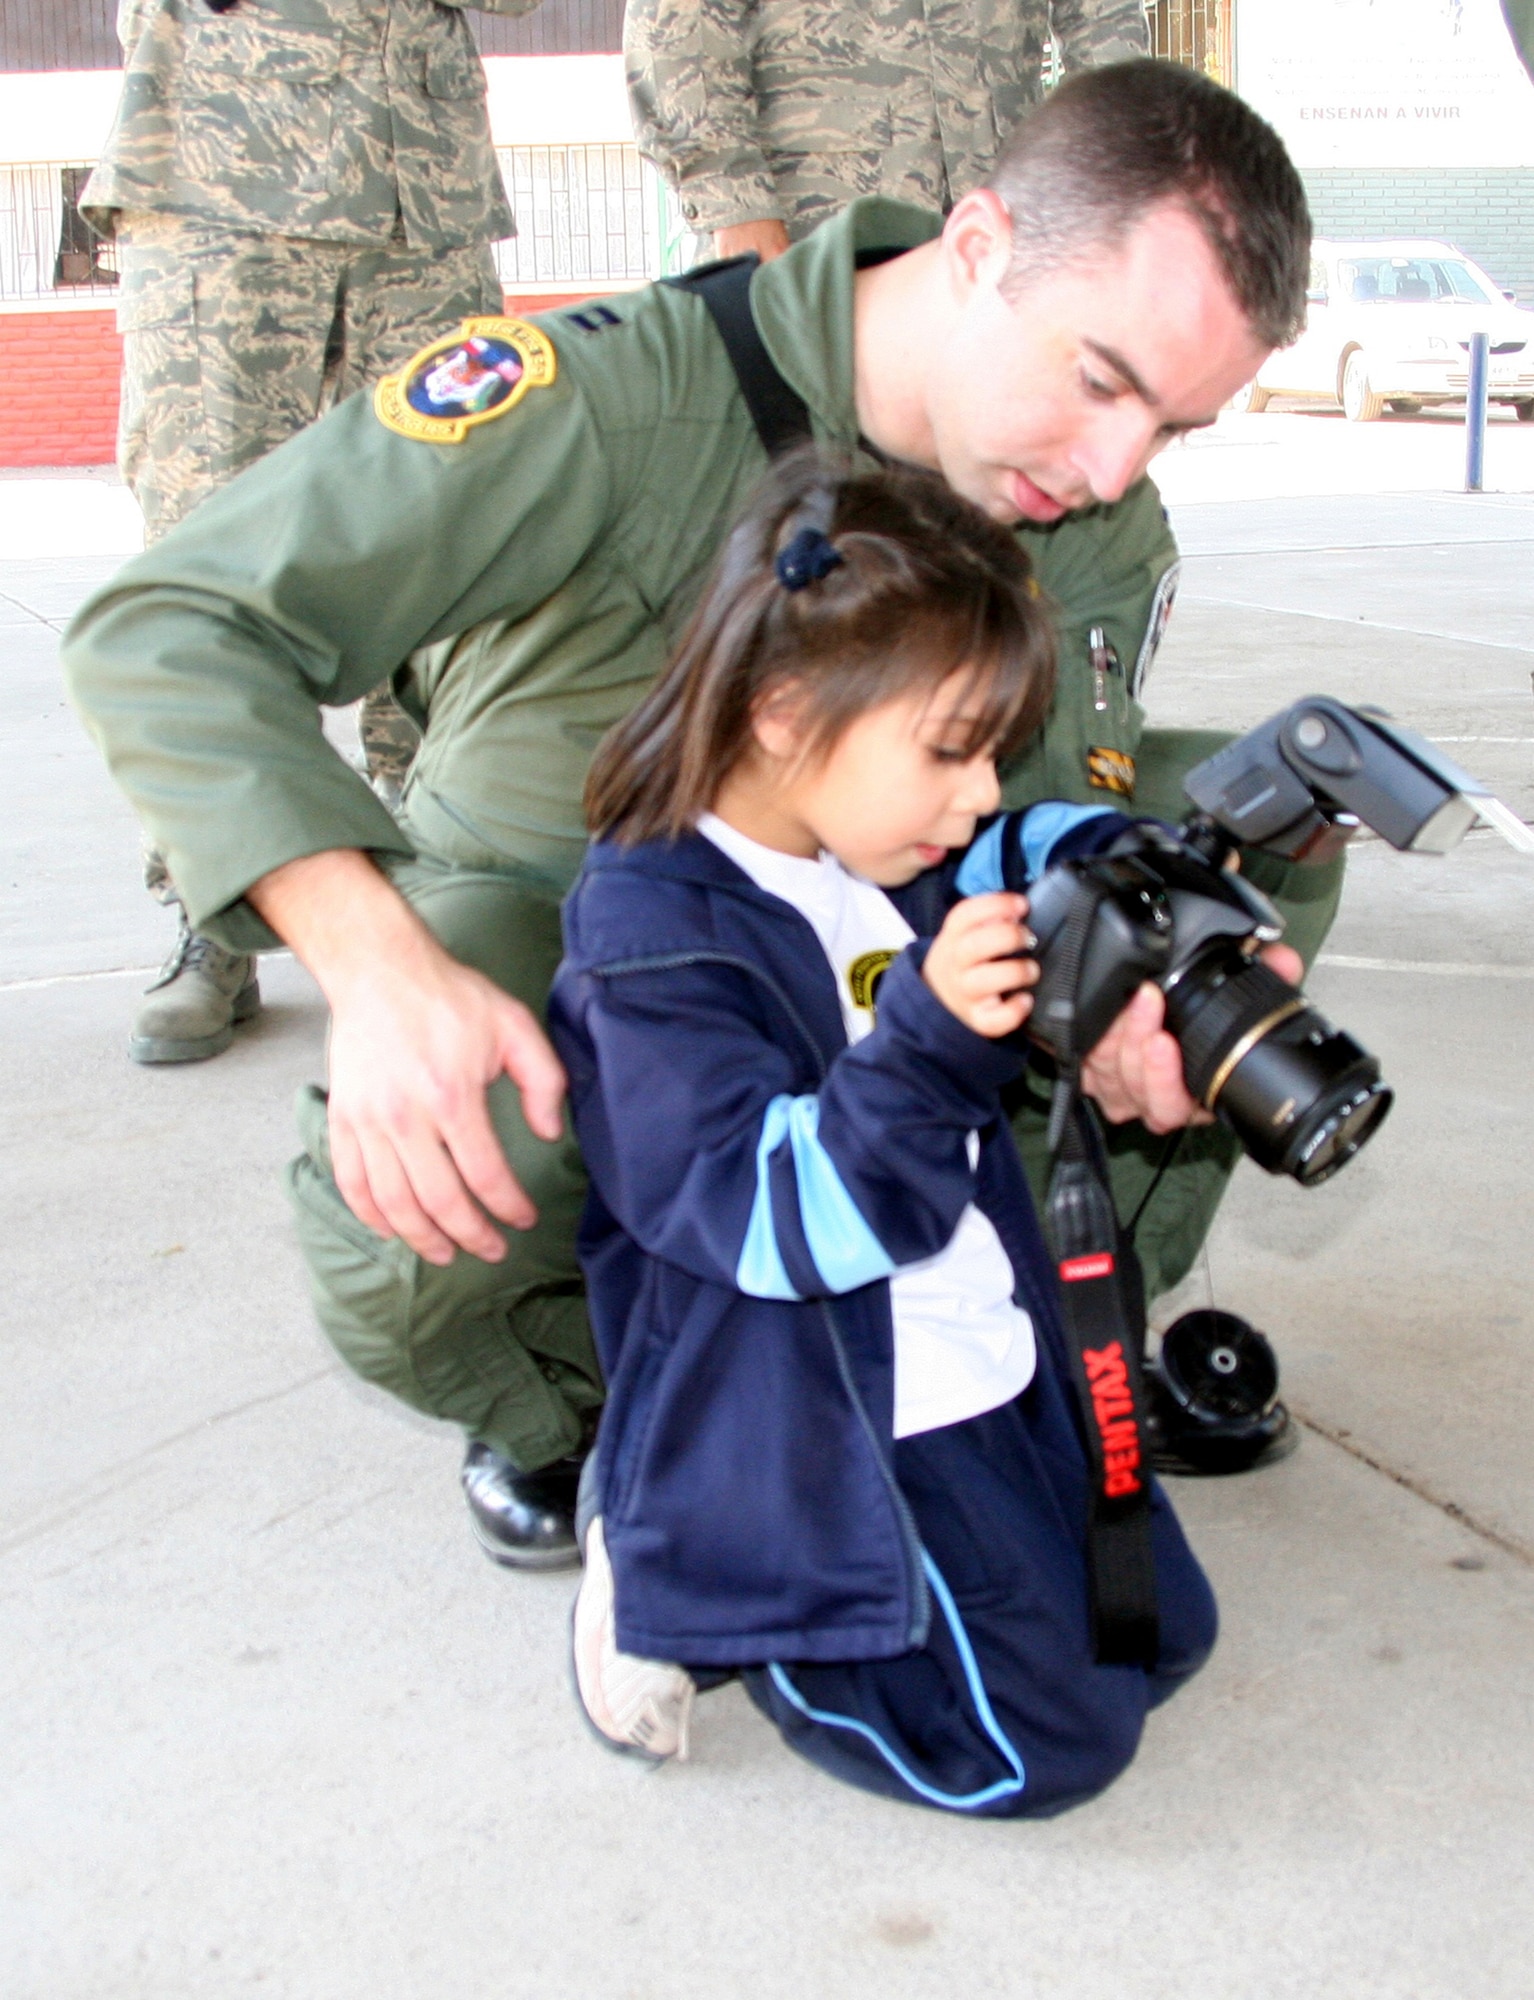 SANTIAGO, Chile - Capt. John Peltier, 391st Fighter Squadron, teaches a Chilean orphan how to take pictures during a performance of the Air Force Band of the Central States at Koinomadelfia Orphanage west of Santiago April 3. Twenty Airmen participating in the FIDAE airshow took a break from aircraft displays and demonstrations to visit more than 30 preschool-aged children at the orphanage to hand out toys, patches and stickers. Koinomadelfia is home to 80 children who have been rescued from domestic violence situations. The FIDAE air show hosts aircraft from 42 countries and is the largest event of its kind in South America. (U.S. Air Force photo by/ 1st Lt. Candace Cutrufo)